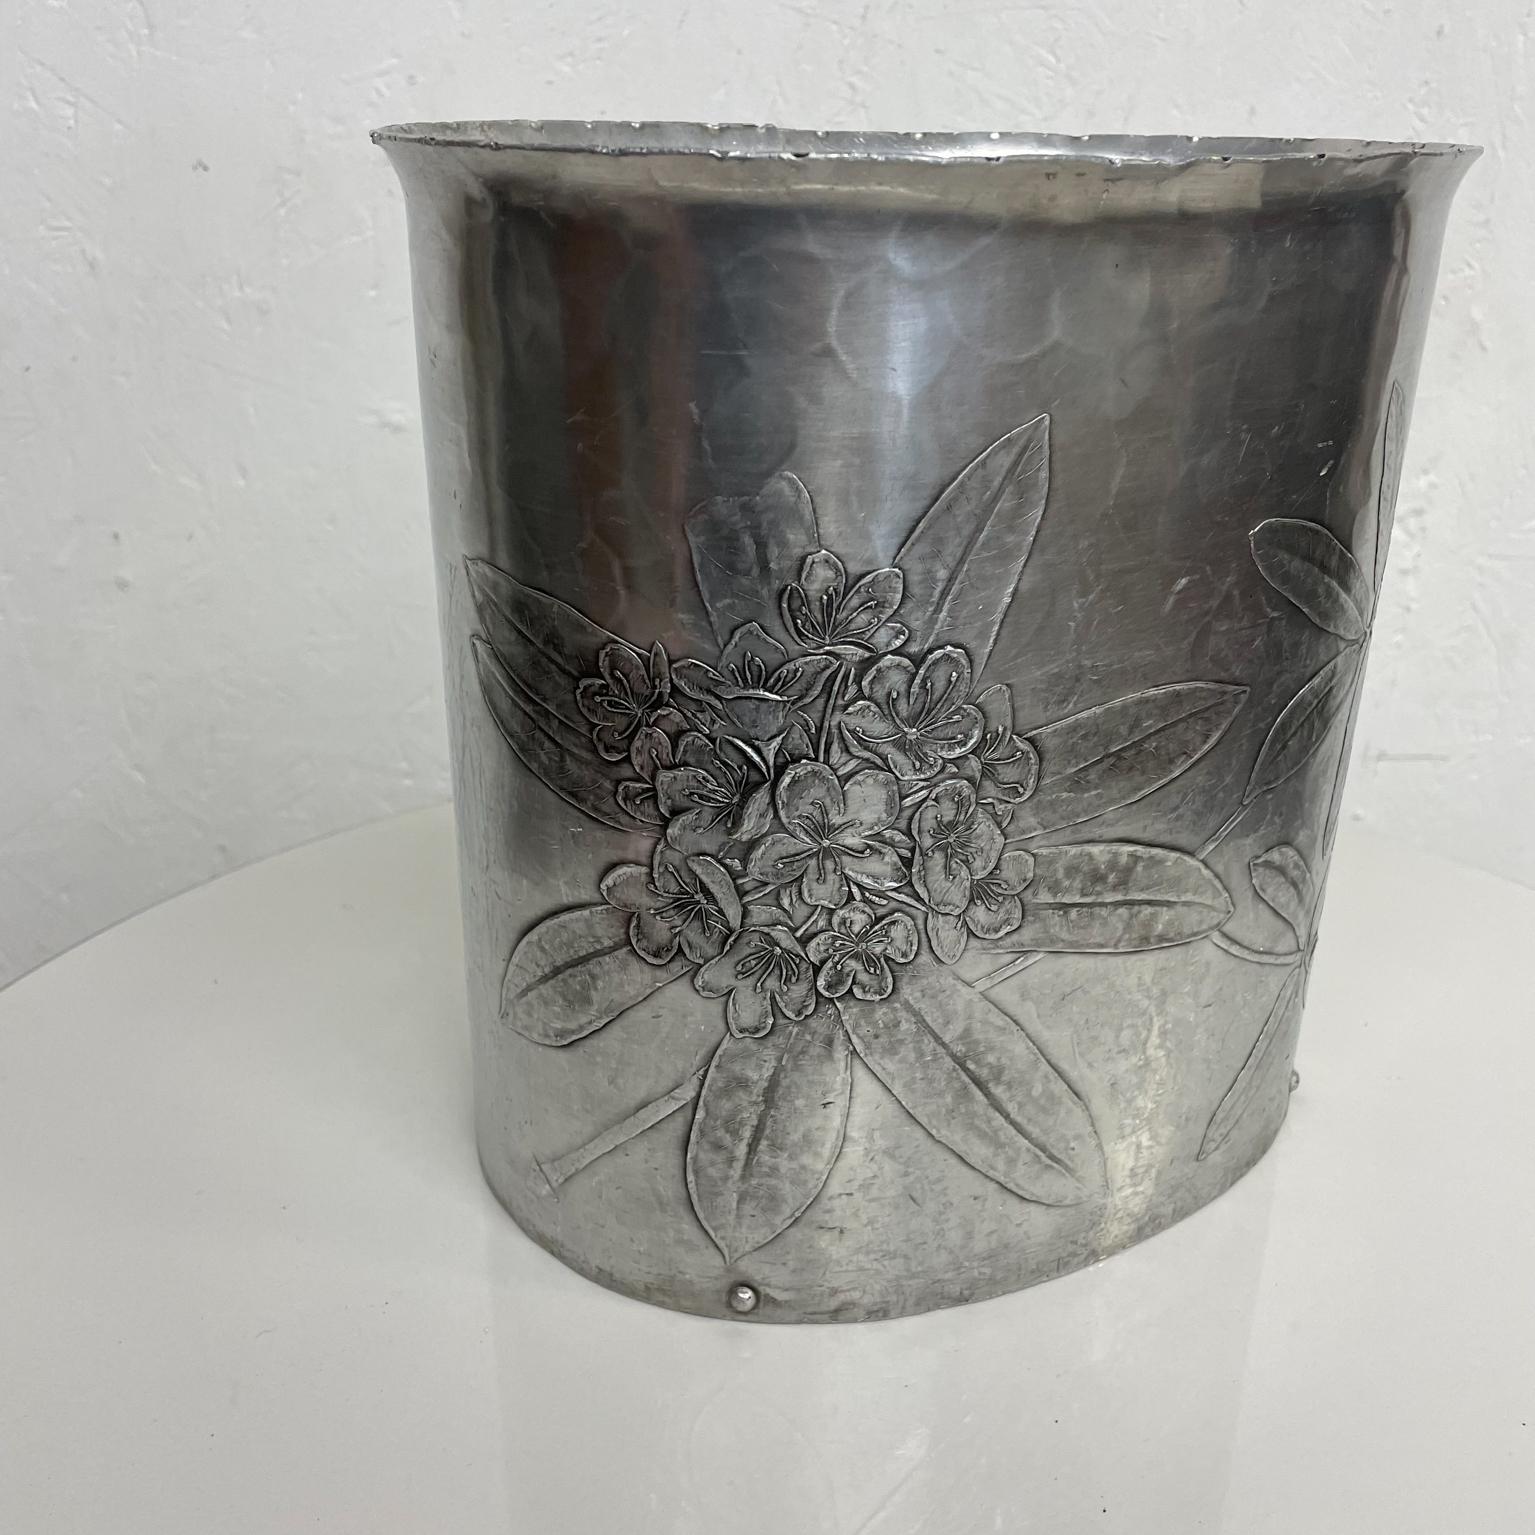 1960s Wendell August Forge Lovely Floral Waste Basket in Aluminum Grove City PA 1